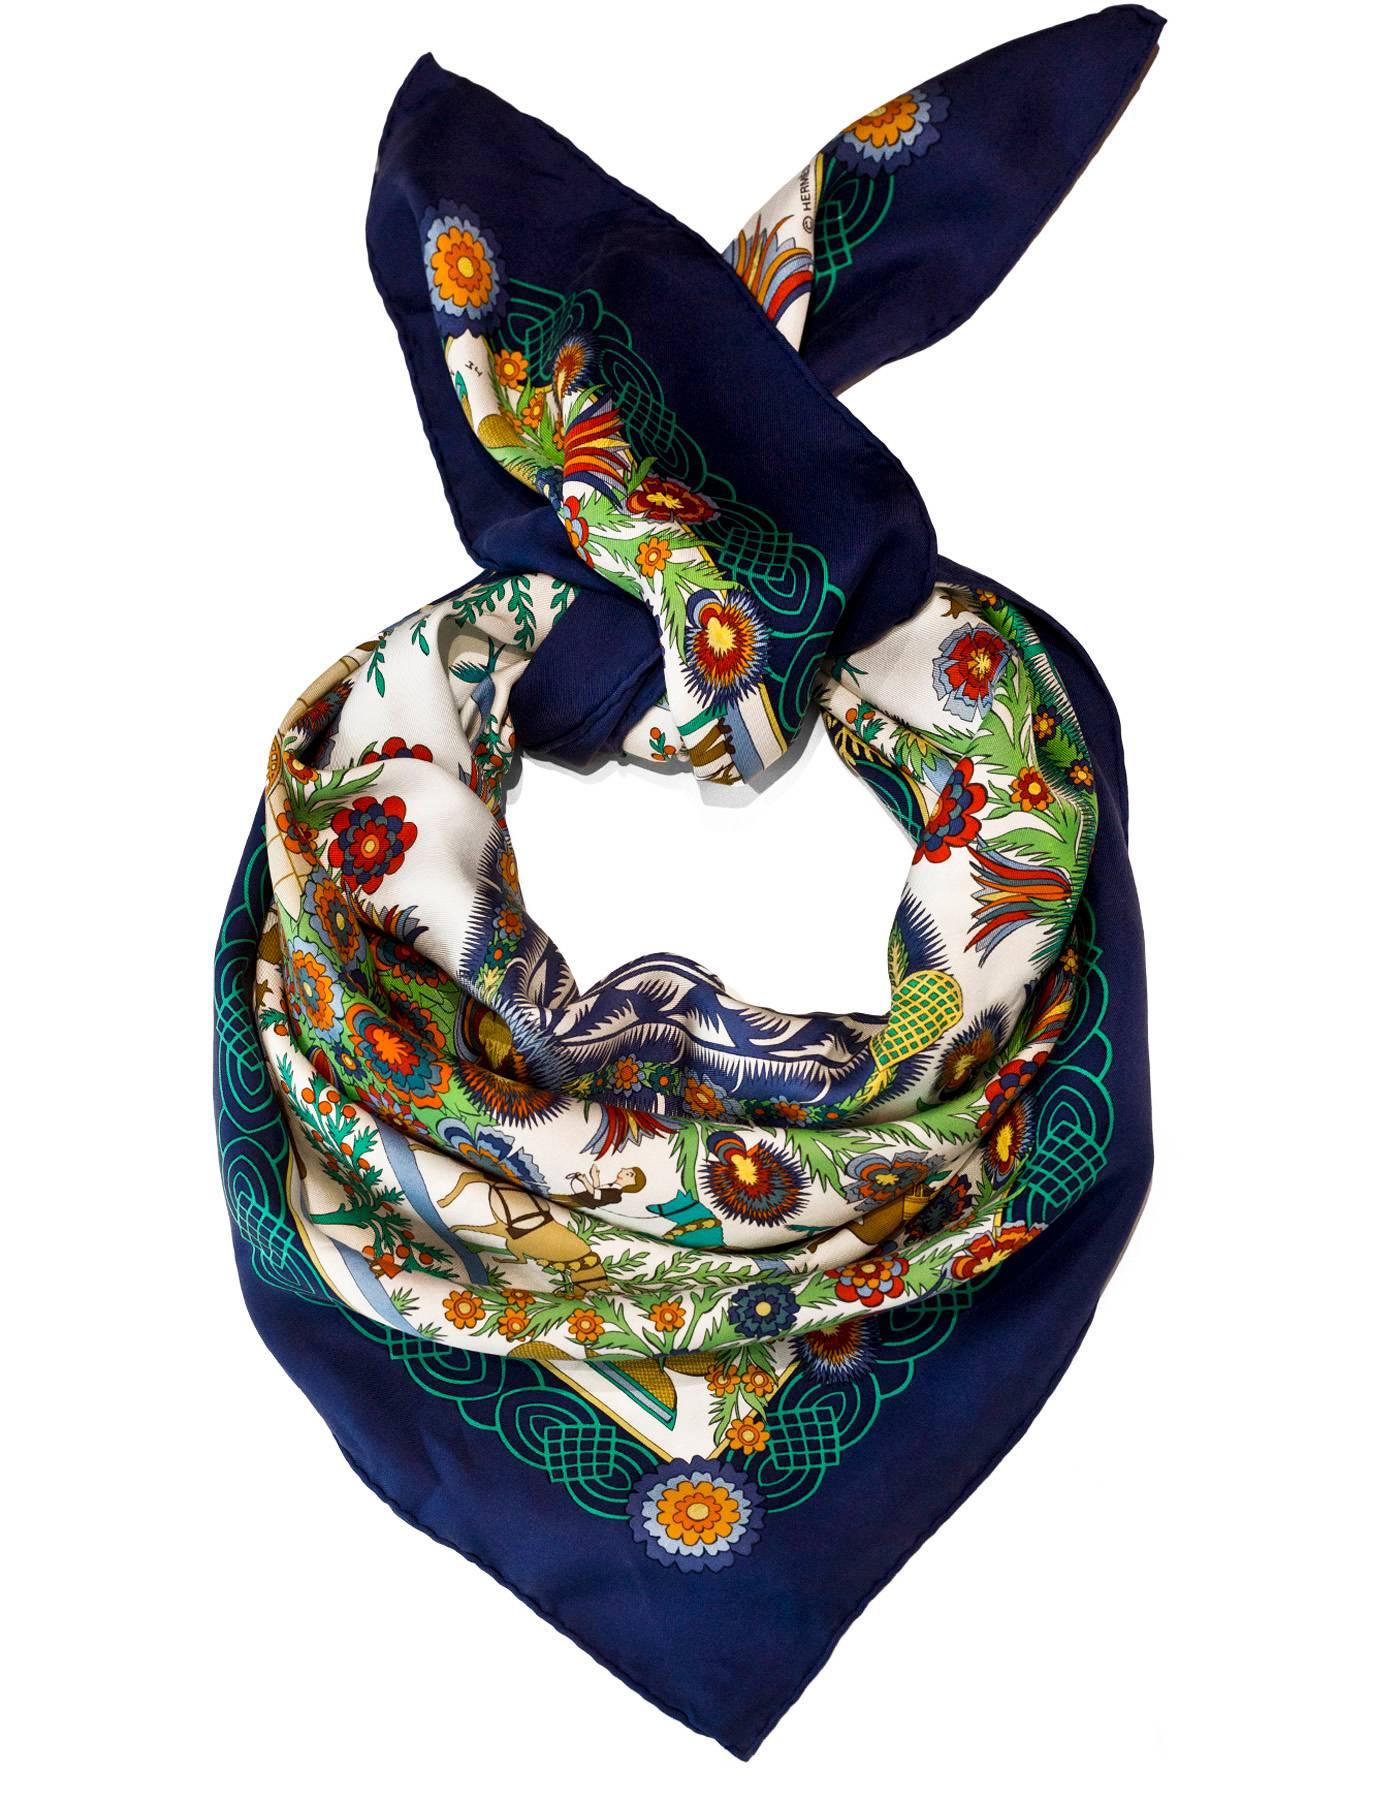 Hermes Navy & Multi-Color Decoupahes Silk 90cm Scarf

Made In: France
Color: Navy, white, red, green
Composition: 100% Silk
Retail Price: $395 + tax
Overall Condition: Excellent pre-owned condition with the exception of some fading and gentle wear